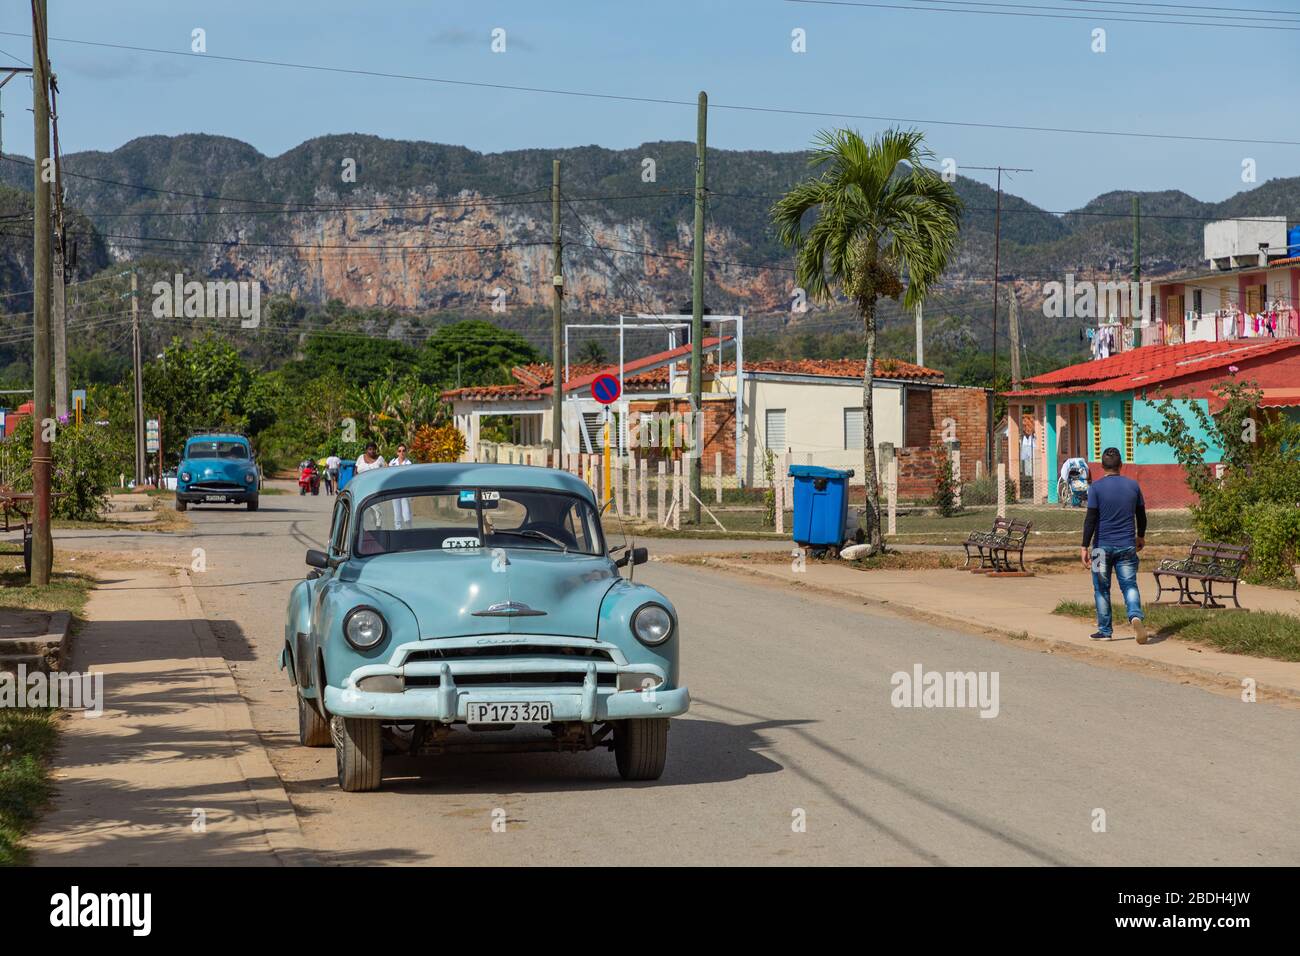 VINALES, CUBA - DECEMBER 14, 2019: Classic American old cars in the Vinales Valley, Cuba Stock Photo